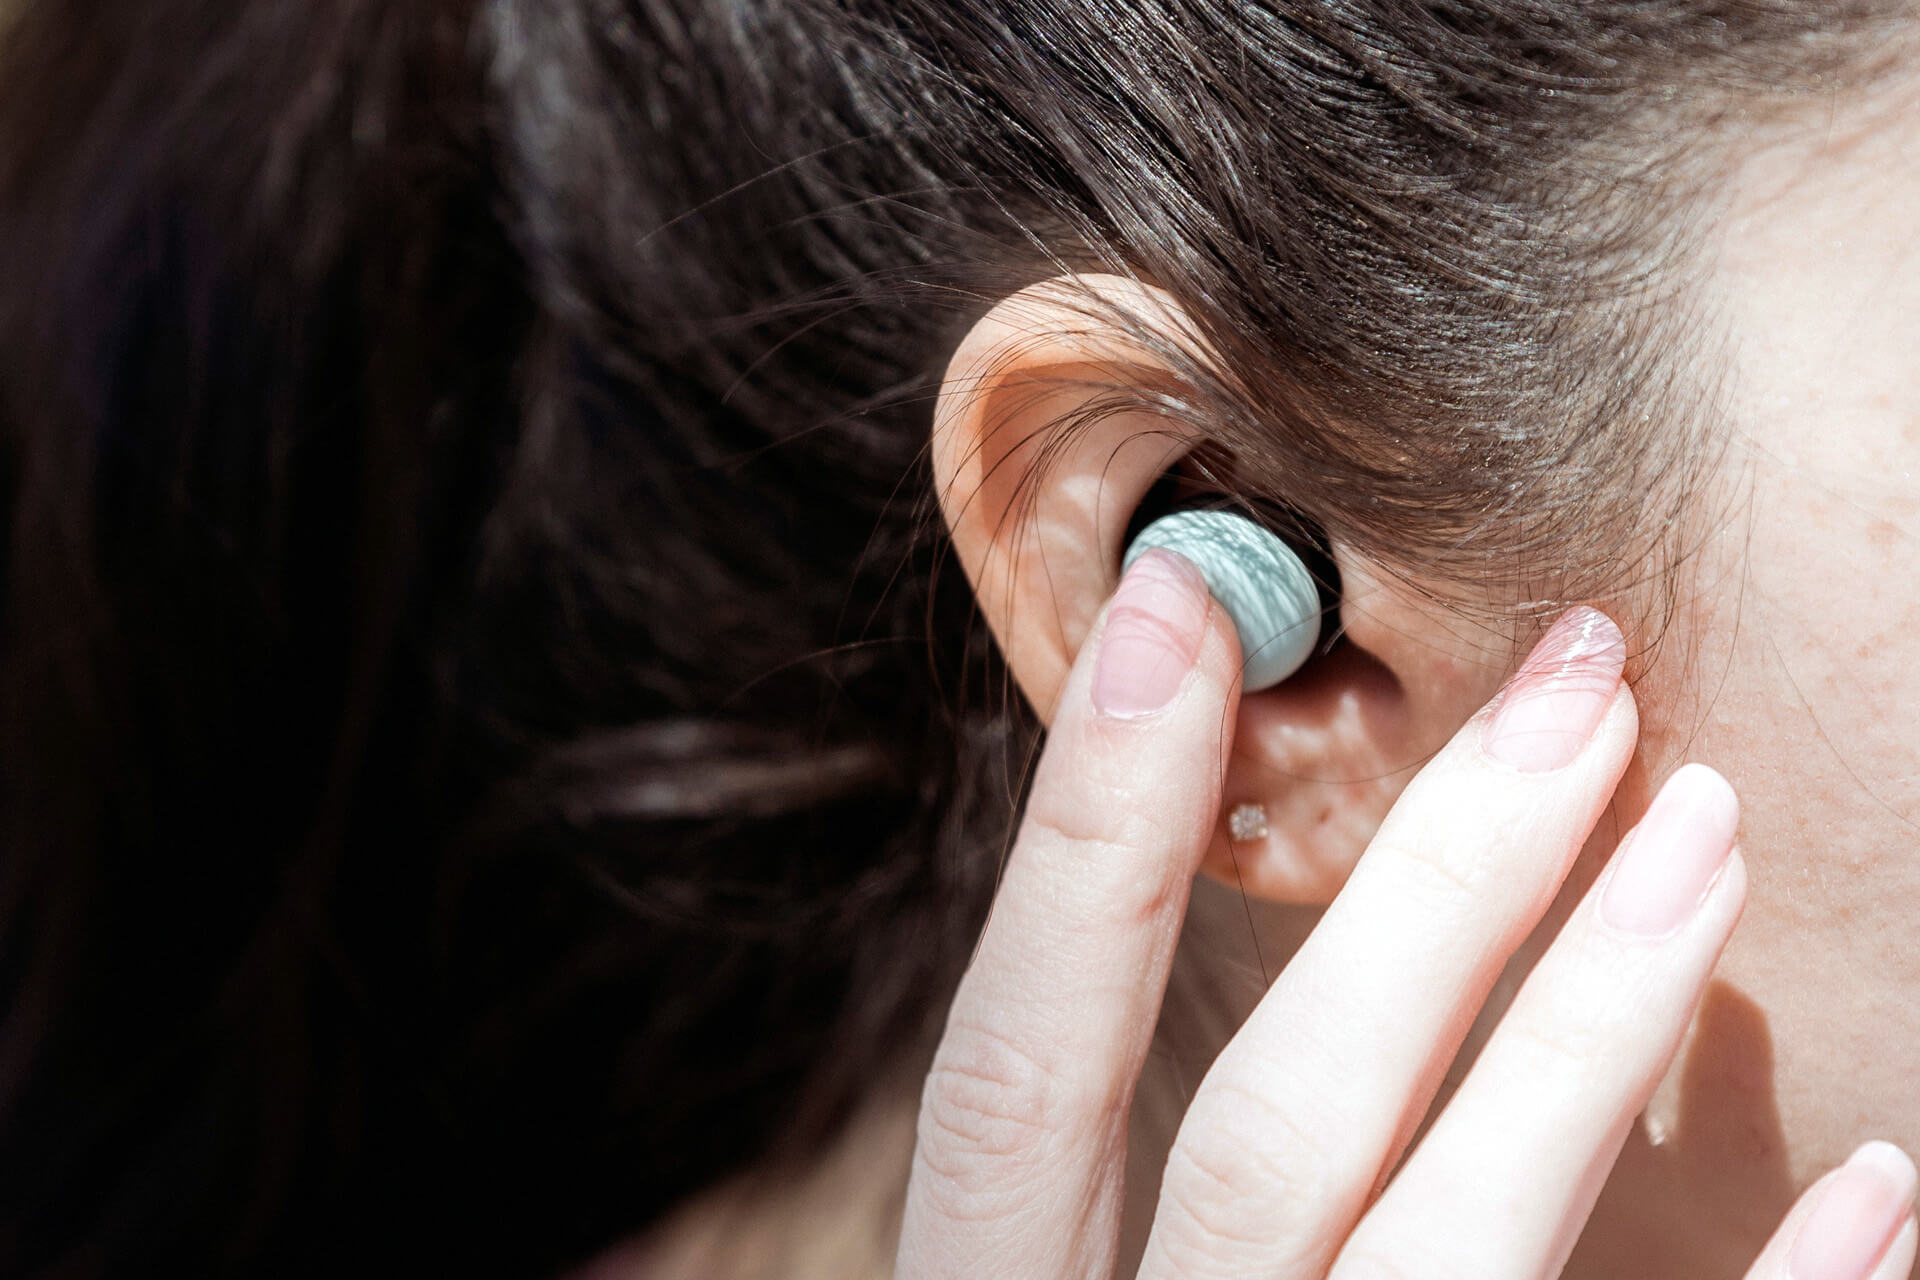 What Could Cause Hearing Loss in Only One Ear?